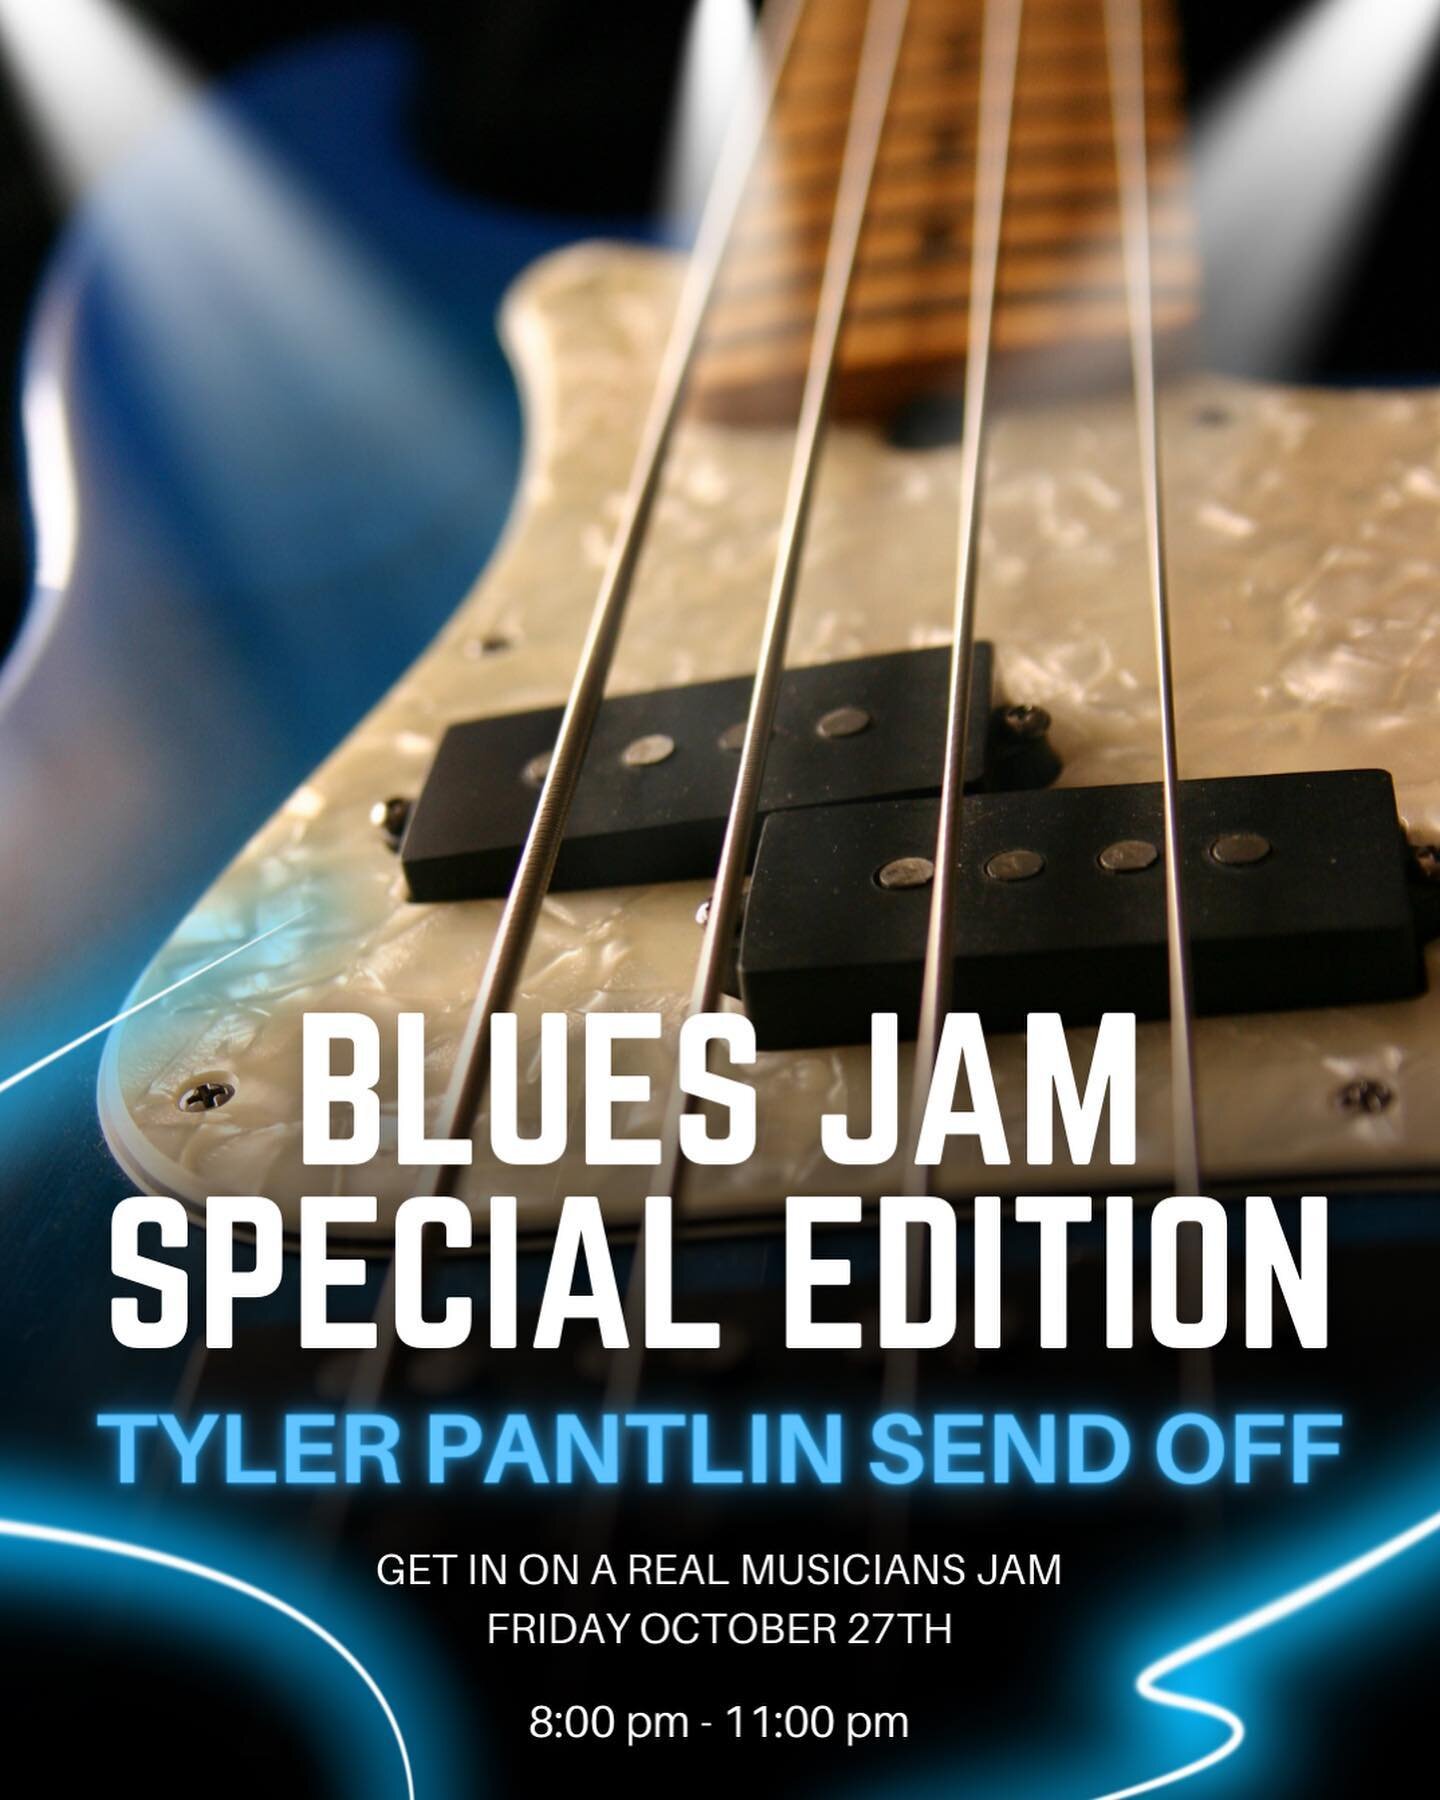 BLUES JAM SPECIAL EDITION: Tyler Pantlin Send Off 🎸🎹🎶

Join us Friday, October 27th from 8-11pm, to get in on a real musicians jam.

Seating is FCFS&mdash;arrive early to grab a table!